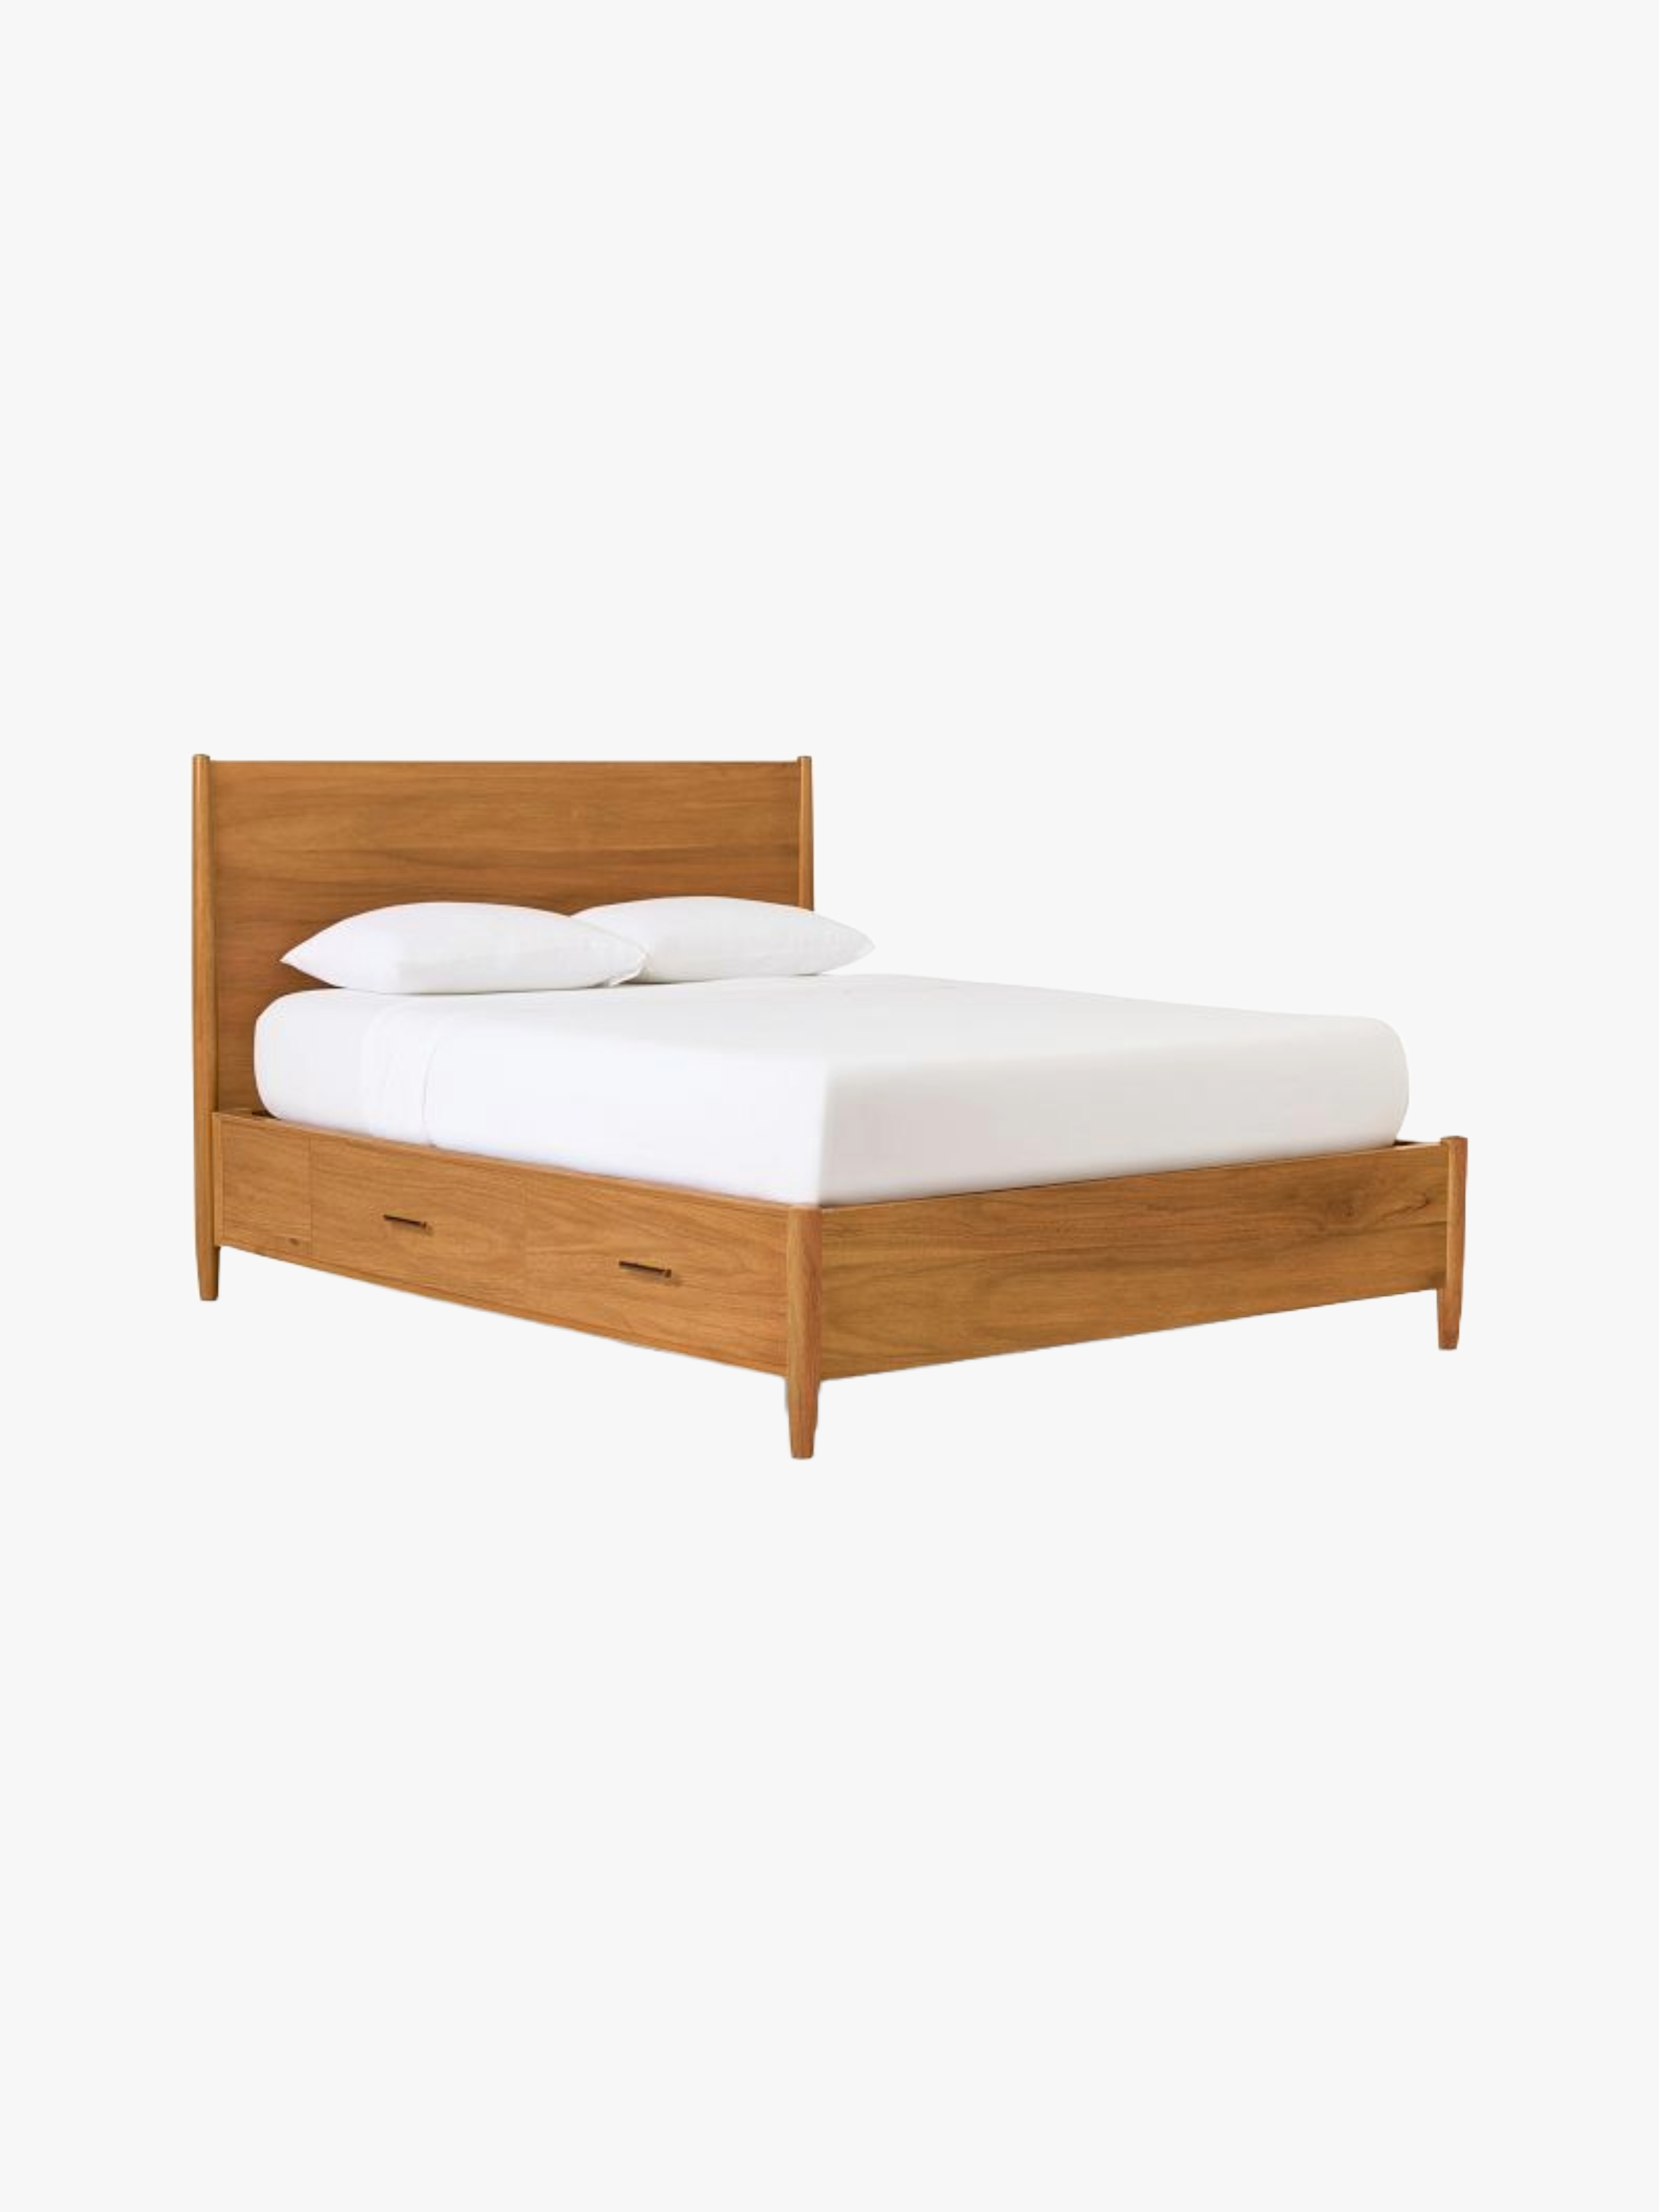 <p>If you're looking for a bed frame that doesn't scream “storage bed,” this midcentury-inspired option from West Elm is a solid one. The understated storage drawers are roomy and easy to pull out, and the Acorn-colored wood grain is smooth and sleek. This frame will fit all kinds of mattresses, and you can pop a box spring in there (but you don't have to).</p> <ul> <li><strong>Sizes available:</strong> Queen, king</li> <li><strong>Colors available:</strong> Acorn</li> <li><strong>Storage type:</strong> Four pullout, underbed storage drawers</li> <li><strong>Materials:</strong> Wood, MDF</li> <li><strong>Weight capacity:</strong> N/A</li> </ul> $2399, West Elm. <a href="https://www.westelm.com/products/mid-century-storage-bed-h11648">Get it now!</a><p>Sign up for our newsletter to get the latest in design, decorating, celebrity style, shopping, and more.</p><a href="https://www.architecturaldigest.com/newsletter/subscribe?sourceCode=msnsend">Sign Up Now</a>